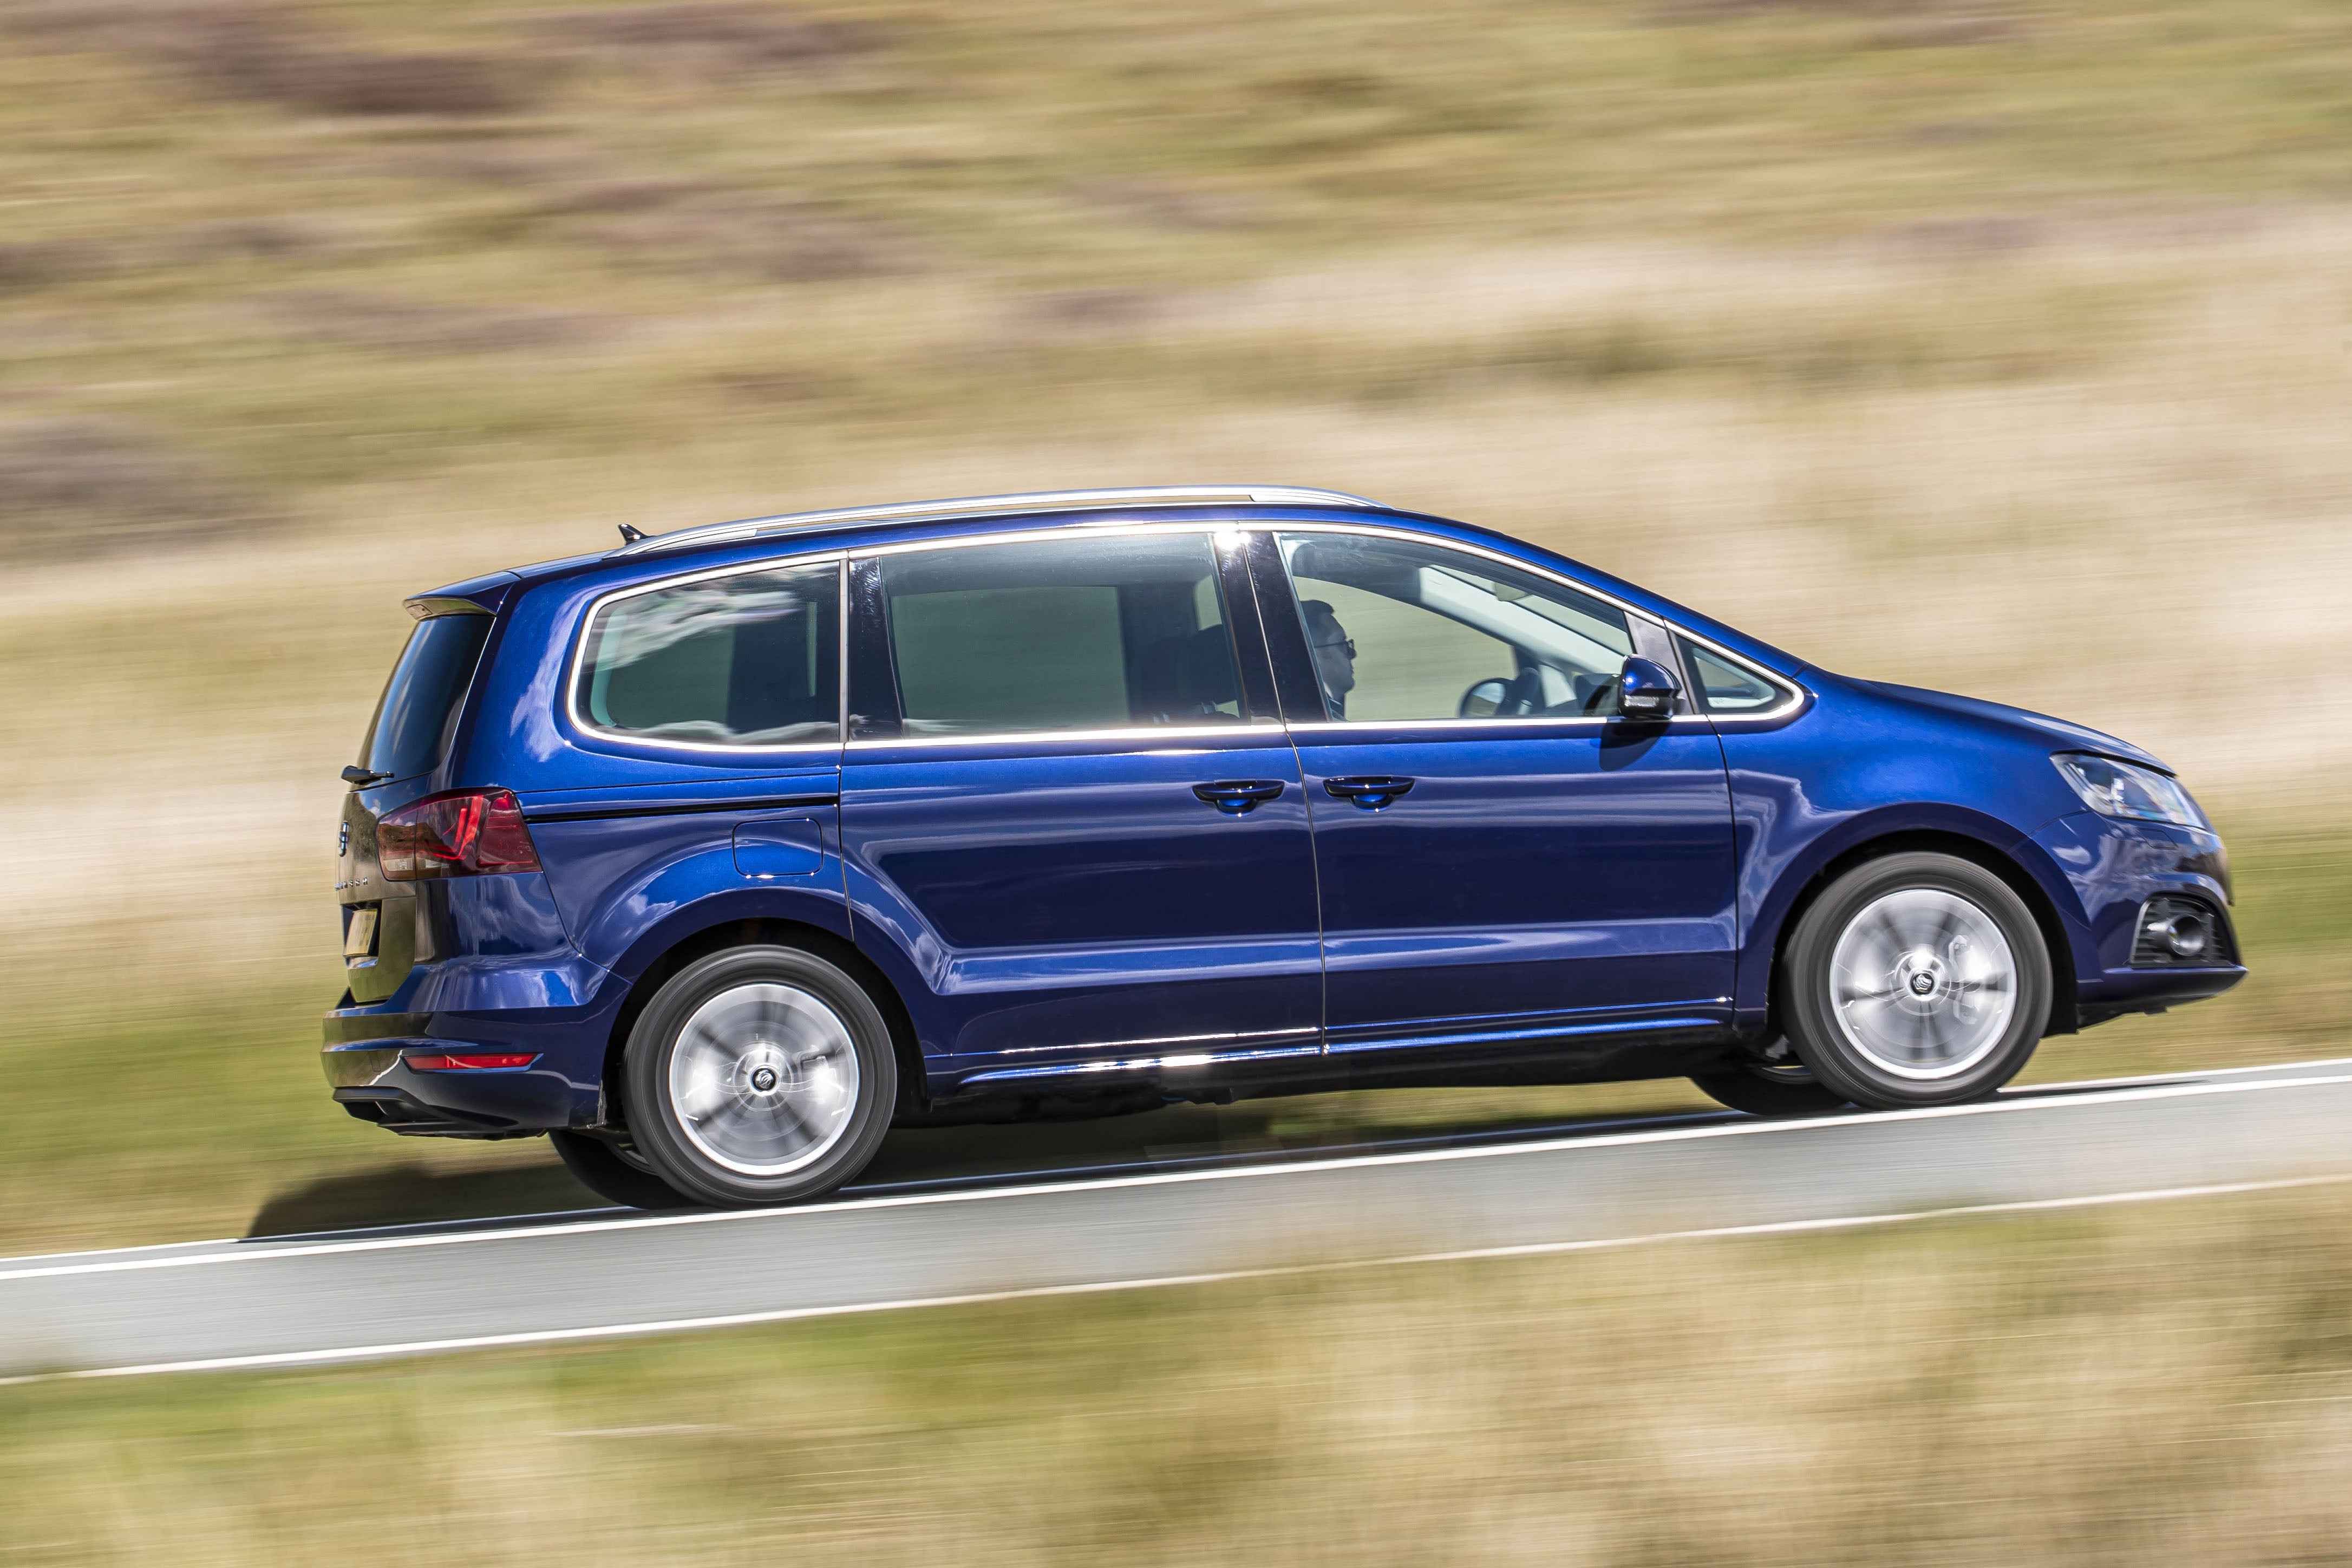 2019 Seat Alhambra review: a seven-up MPV with just enough fizz